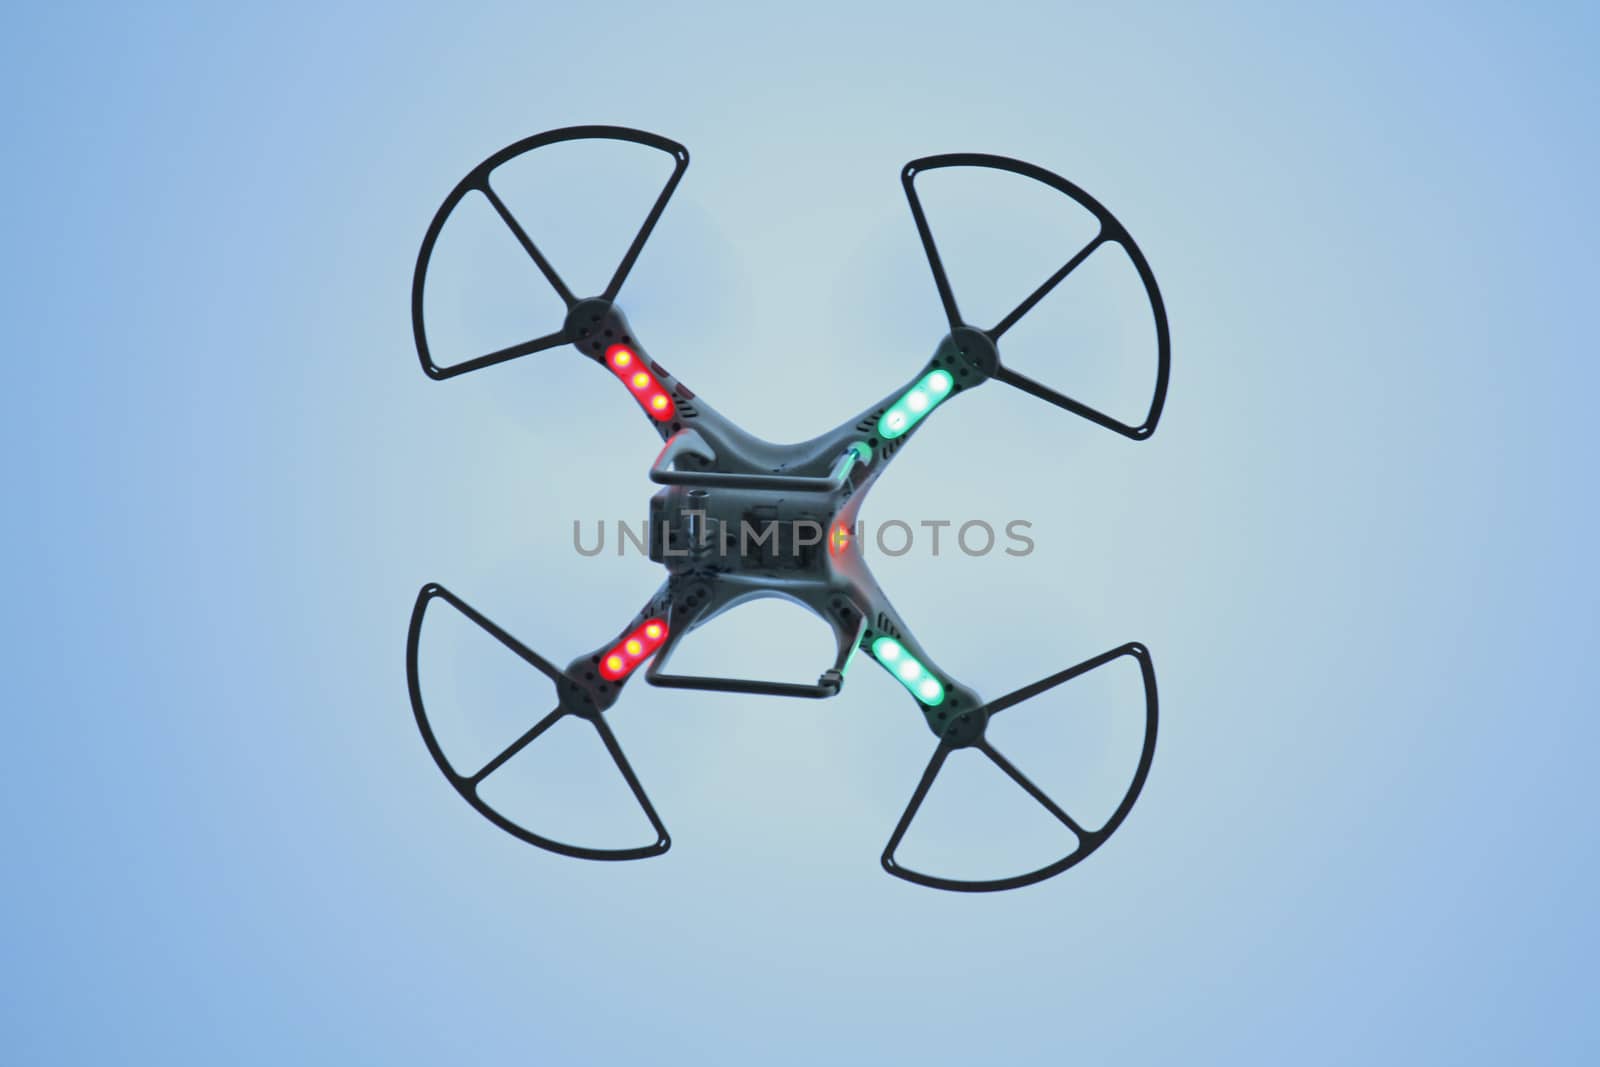 A quadcopter, also called a quadrotor helicopter, quadrotor is a multirotor helicopter that is lifted and propelled by four rotors. Quadcopters are classified as rotorcraft, as opposed to fixed-wing aircraft, because their lift is generated by a set of rotors (vertically oriented propellers).